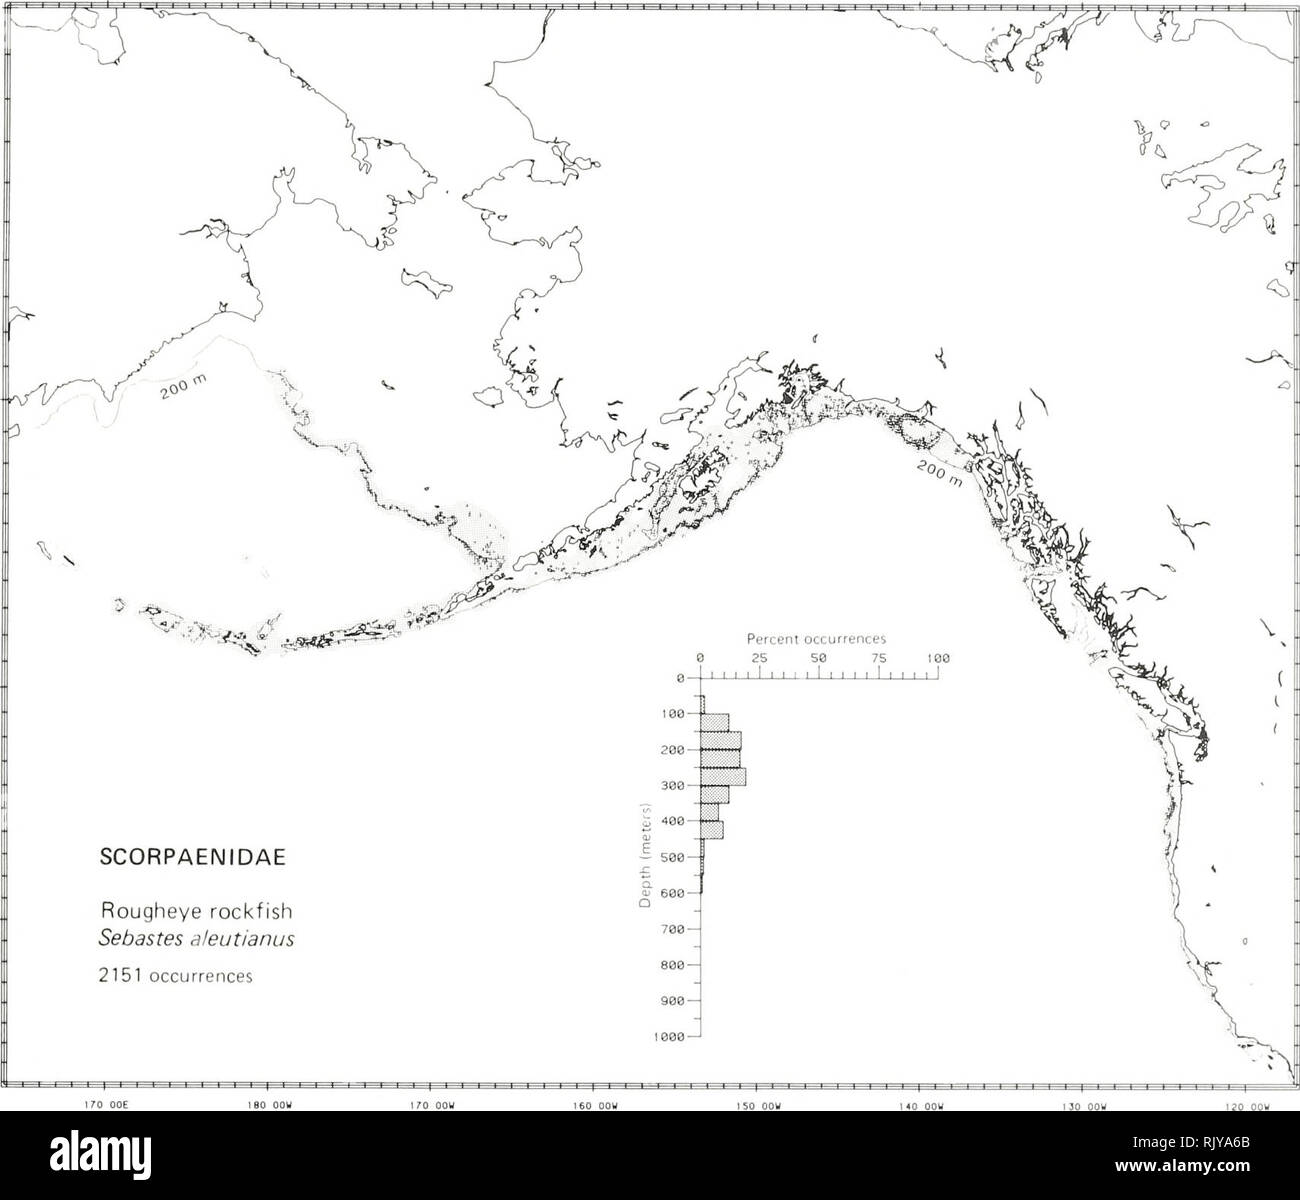 . Atlas and zoogeography of common fishes in the Bering Sea and Northeastern Pacific / M. James Allen, Gary B. Smith. Fishes Bering Sea Geographical distribution.. ROUGHEYE ROCKFISH, Sebastes aleutianus (Jordan and Evermann 1898) Scorpaenidae: Scorpionfishes Literature Reported from Japan to the Bering Sea (but not in the Sea of Okhotsk), west in the Aleutian Islands to Amchitka Island, and south to San Diego, California (Miller and Lea 1972; Simenstad et al. 1977; Howe 1981; Eschmeyer and Herald 1983). Reported depths from 88 to 732 m (deeper records to 2820 m were probably shortraker rockfis Stock Photo